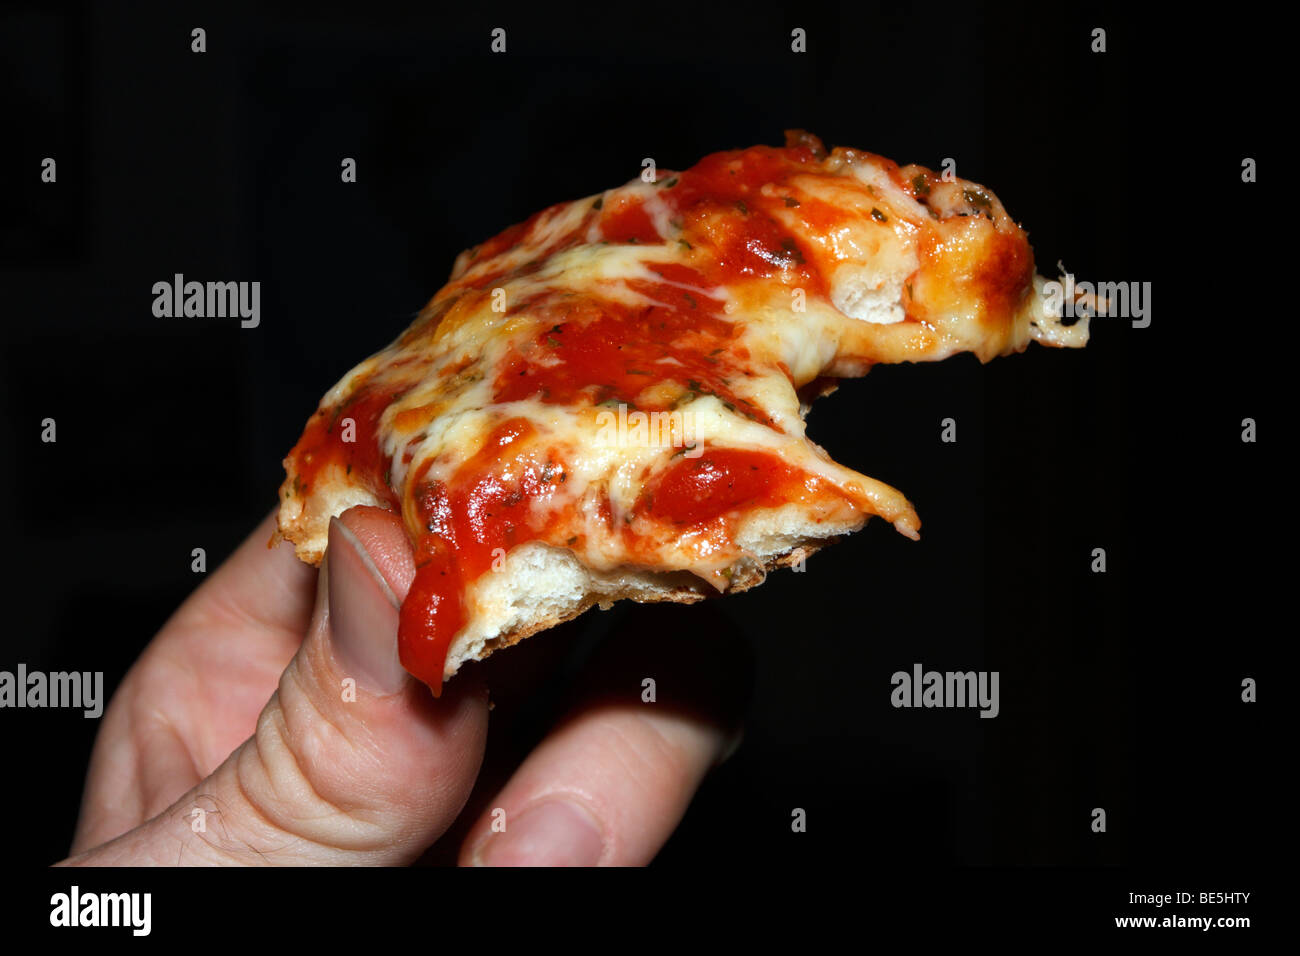 Freshly cooked pizza in hand. Stock Photo